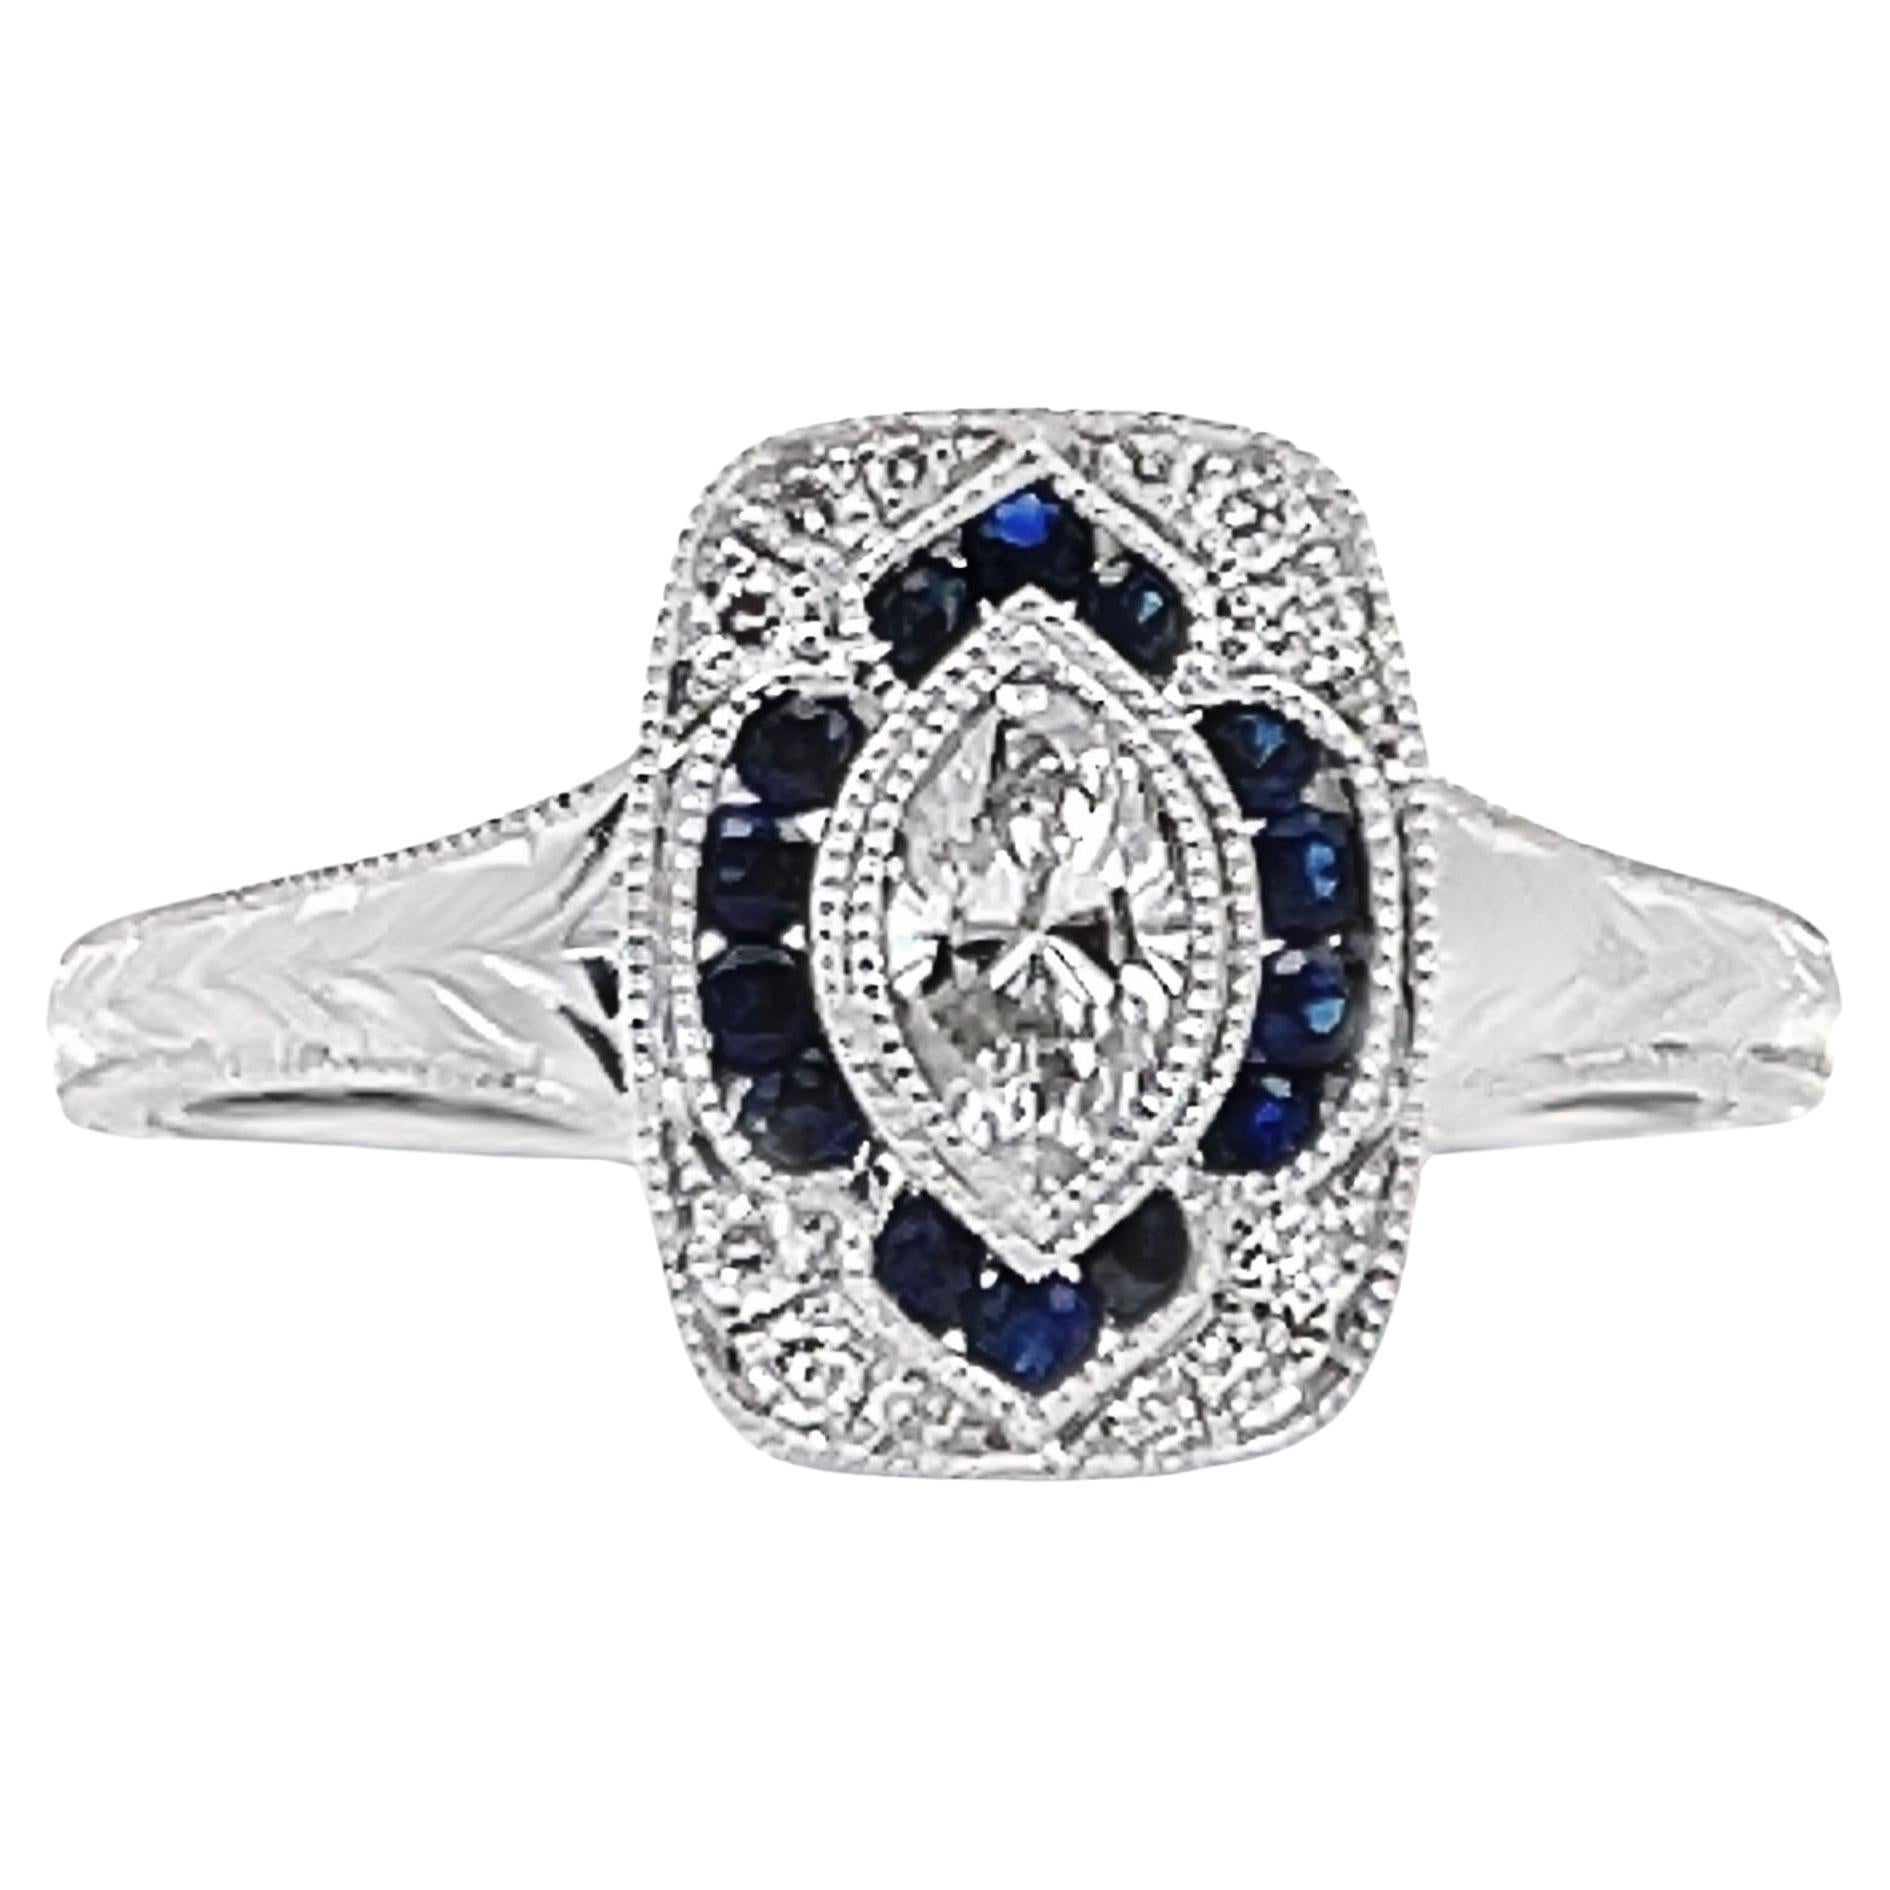 14K White Gold Antique Inspired Ring with Diamond and Sapphire